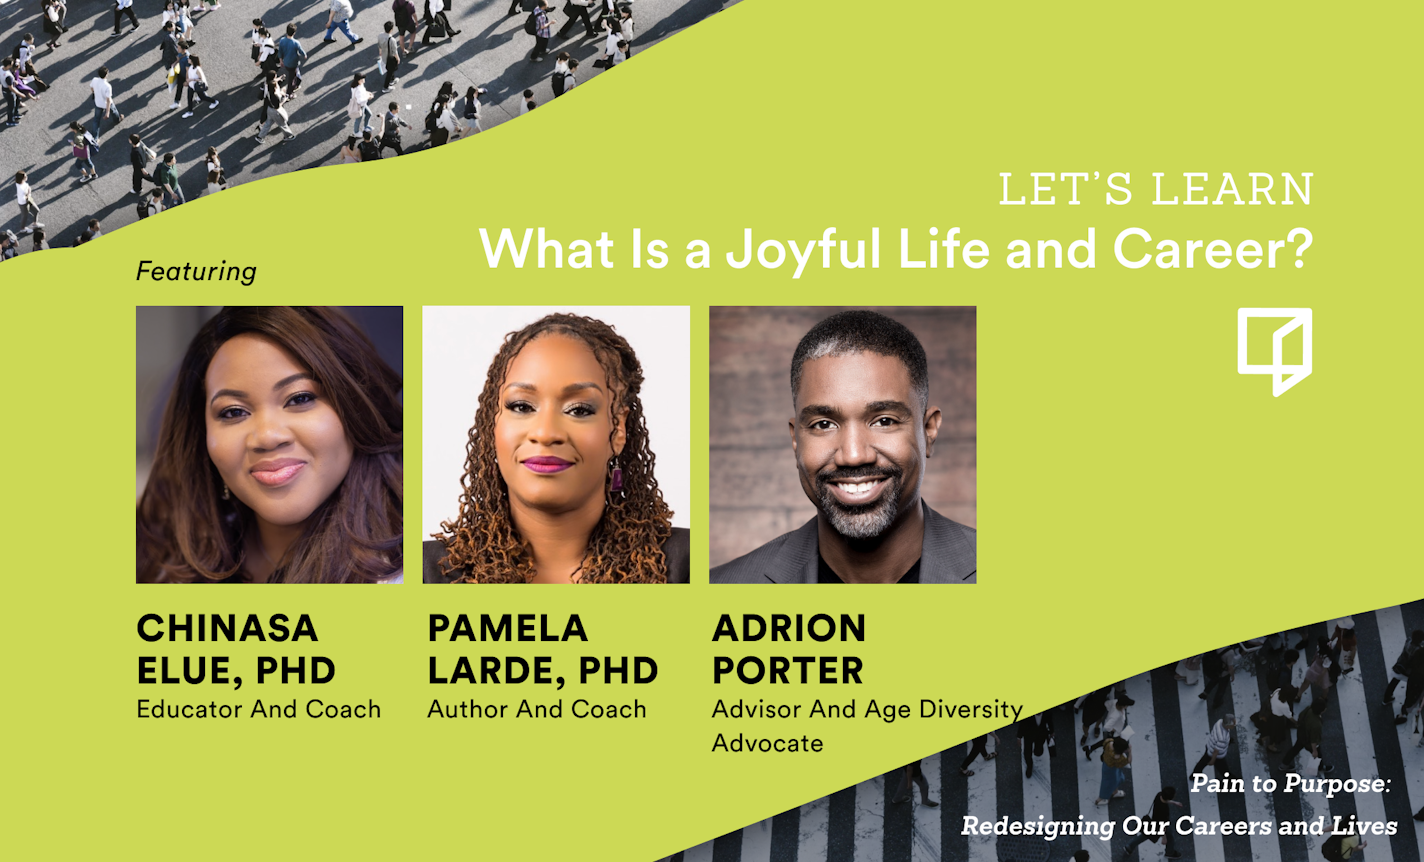 Let’s Learn: What Is a Joyful Life and Career?